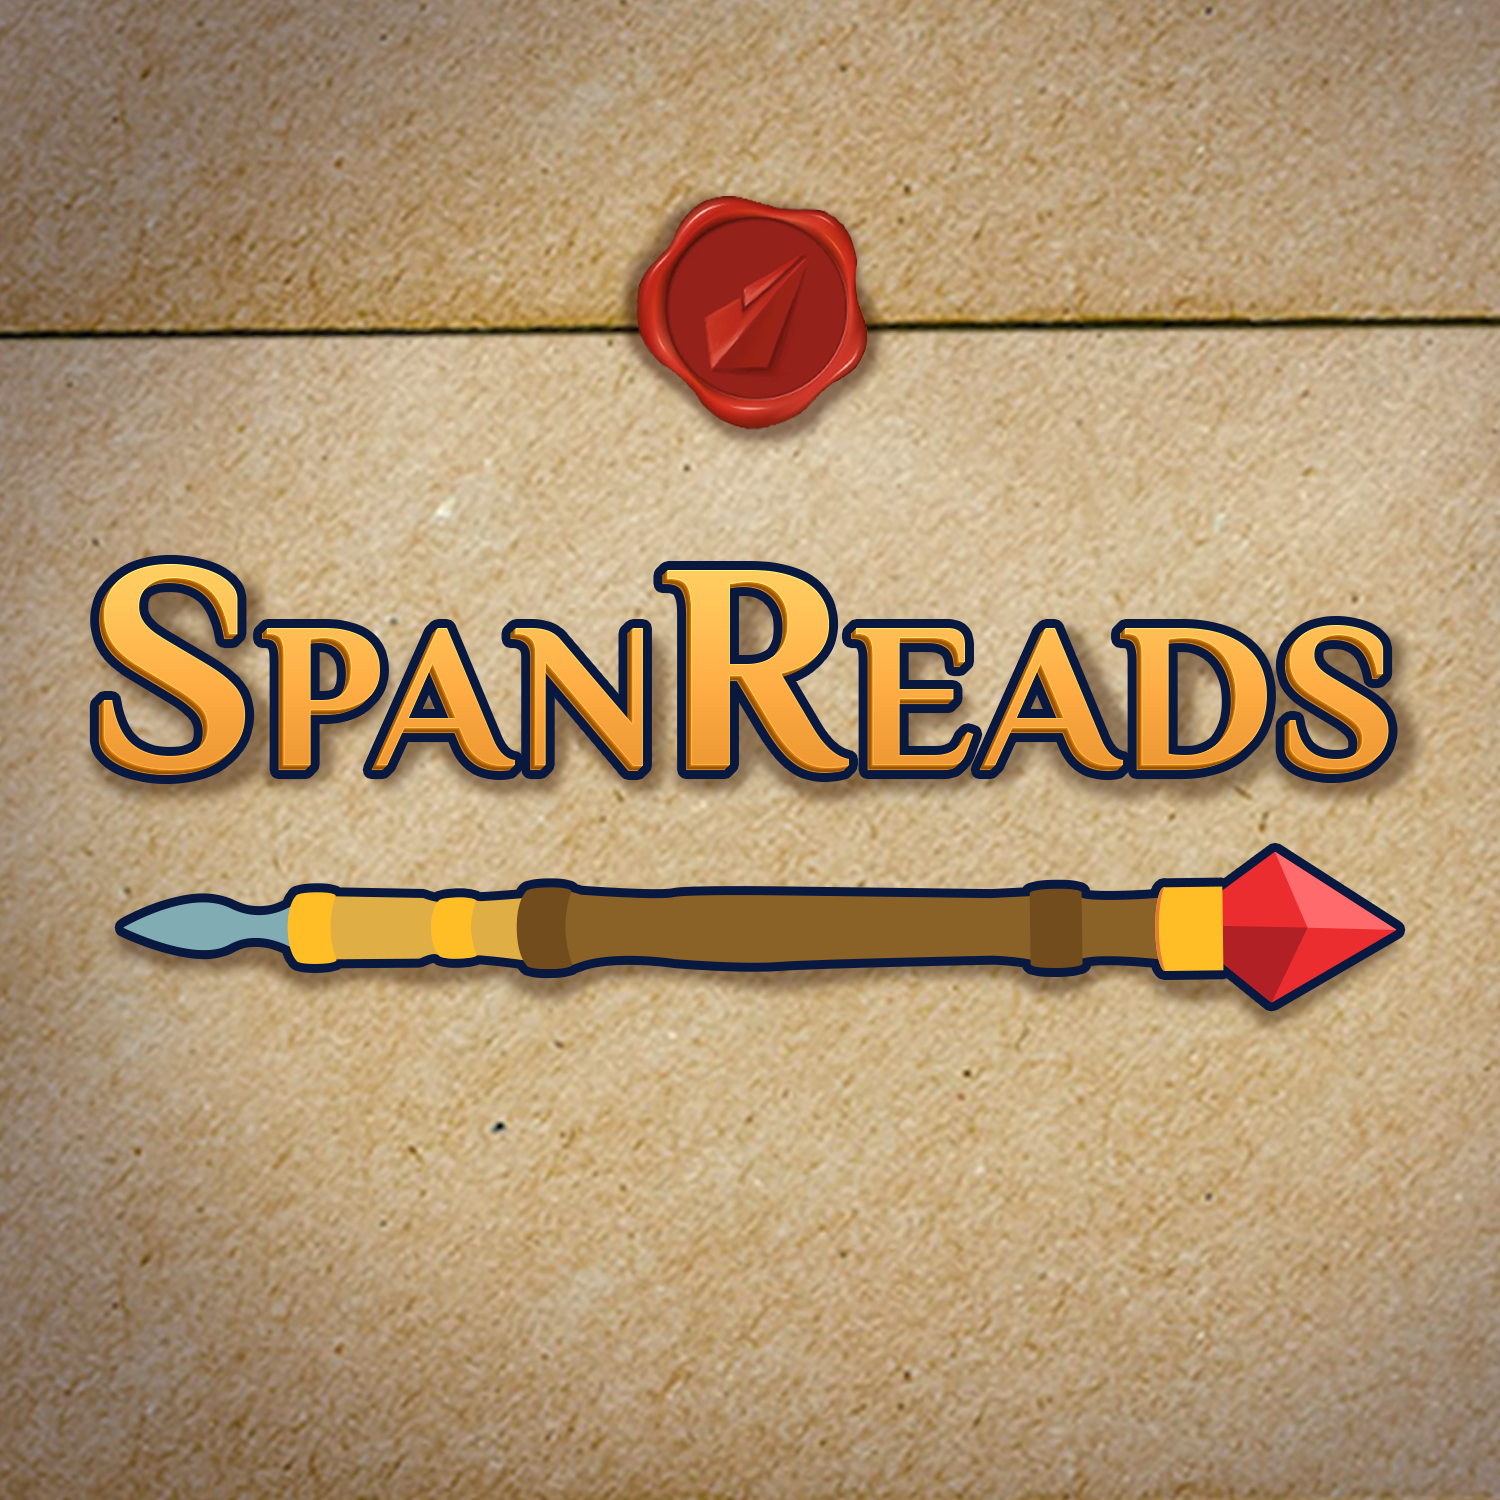 More information about "SpanReads: The Final Empire - Cosmere Implications"